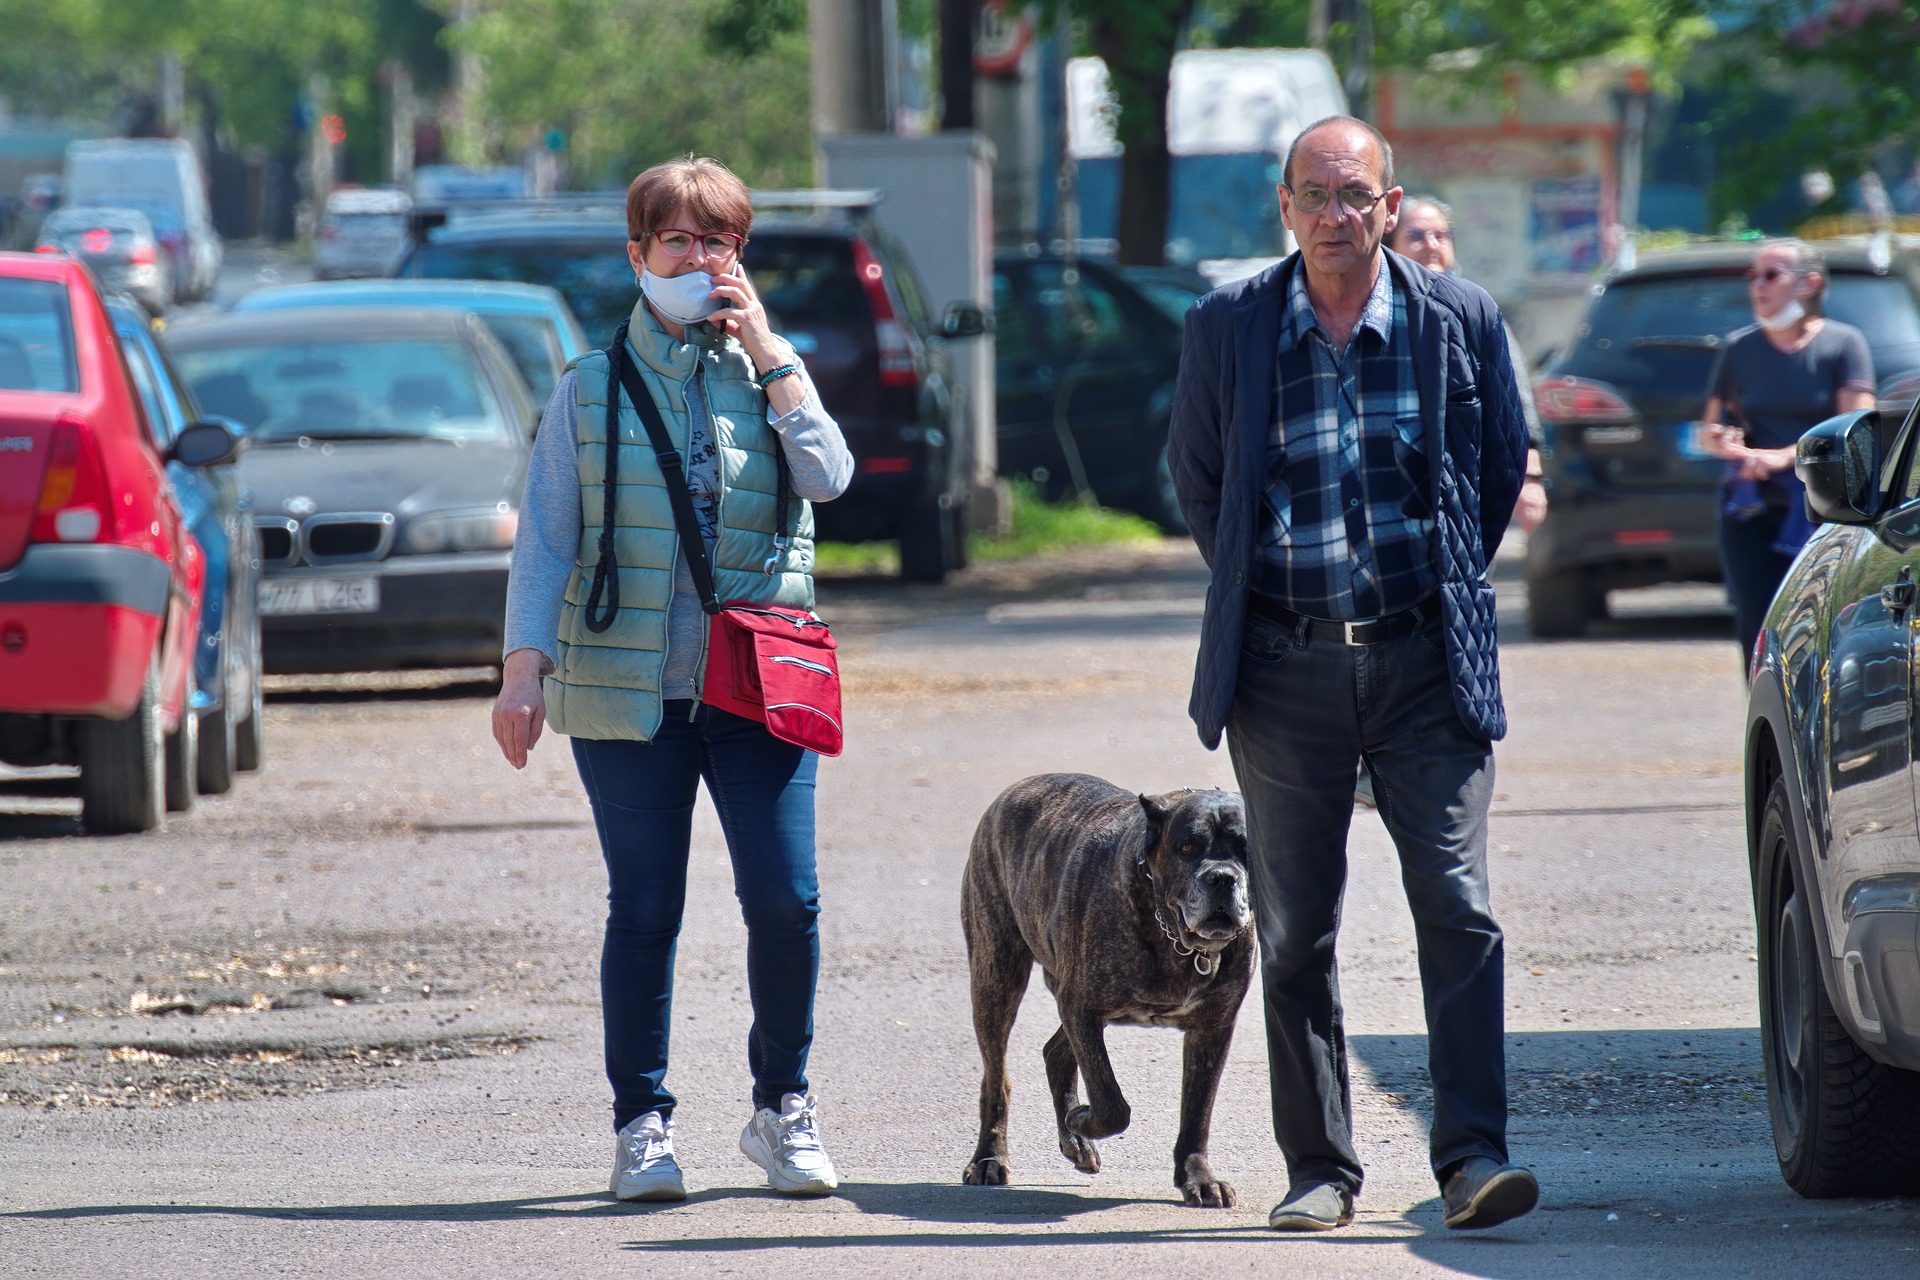 Man and woman in street with dog.